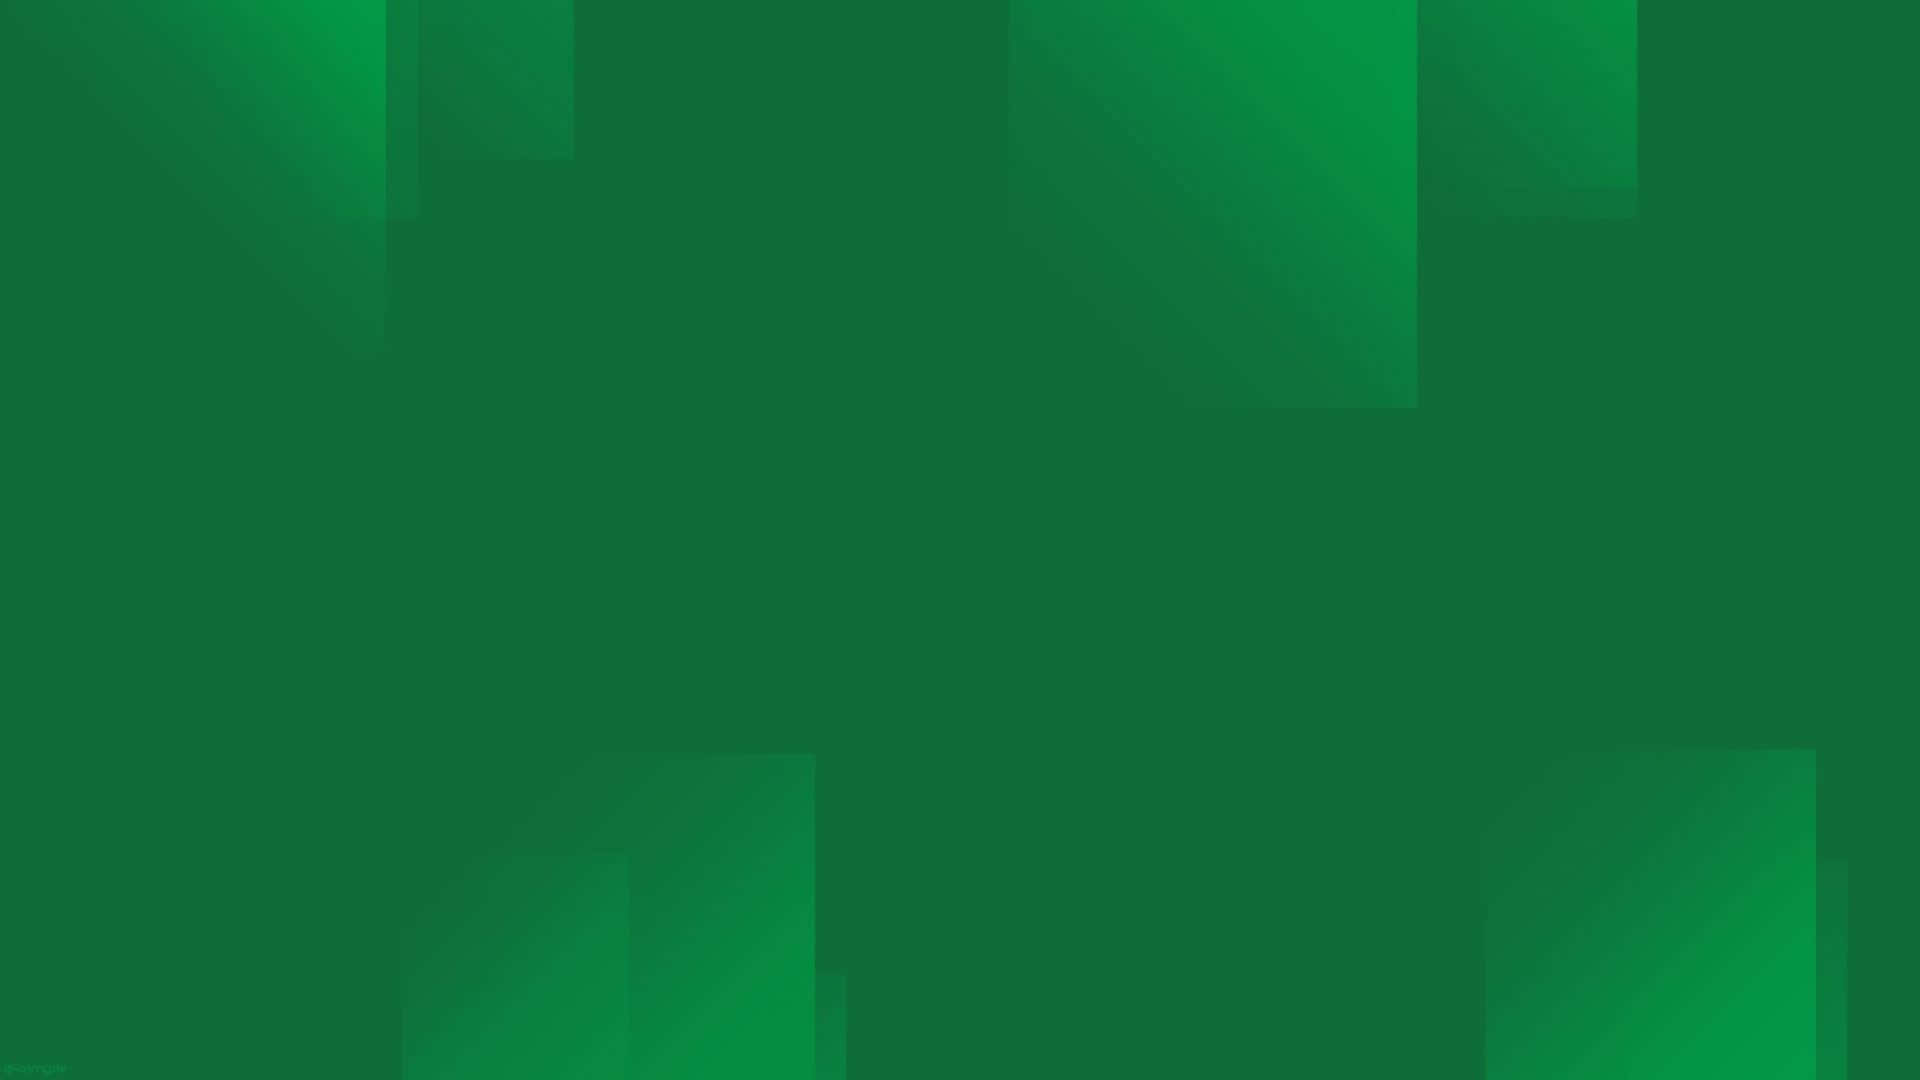 Green Background With A Green Square